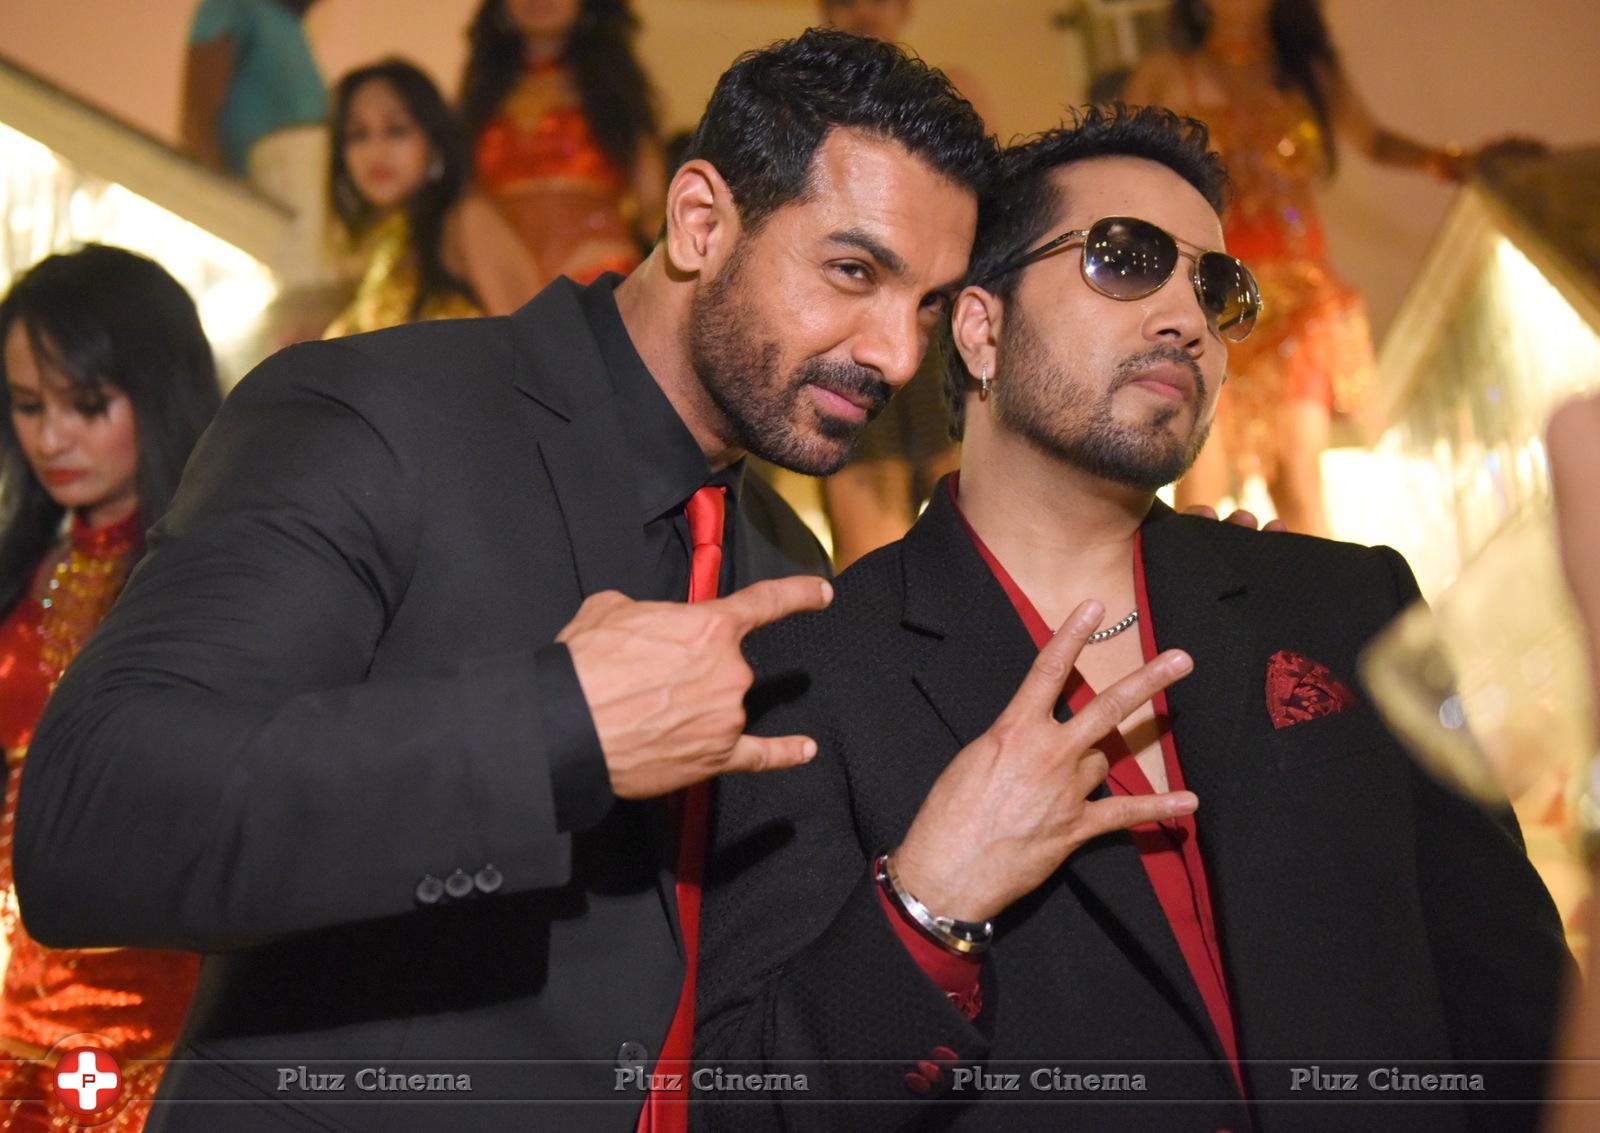 Mika Singh with John Abraham and Shruti Hasan On Location for WELCOME BACK Pics | Picture 1062394